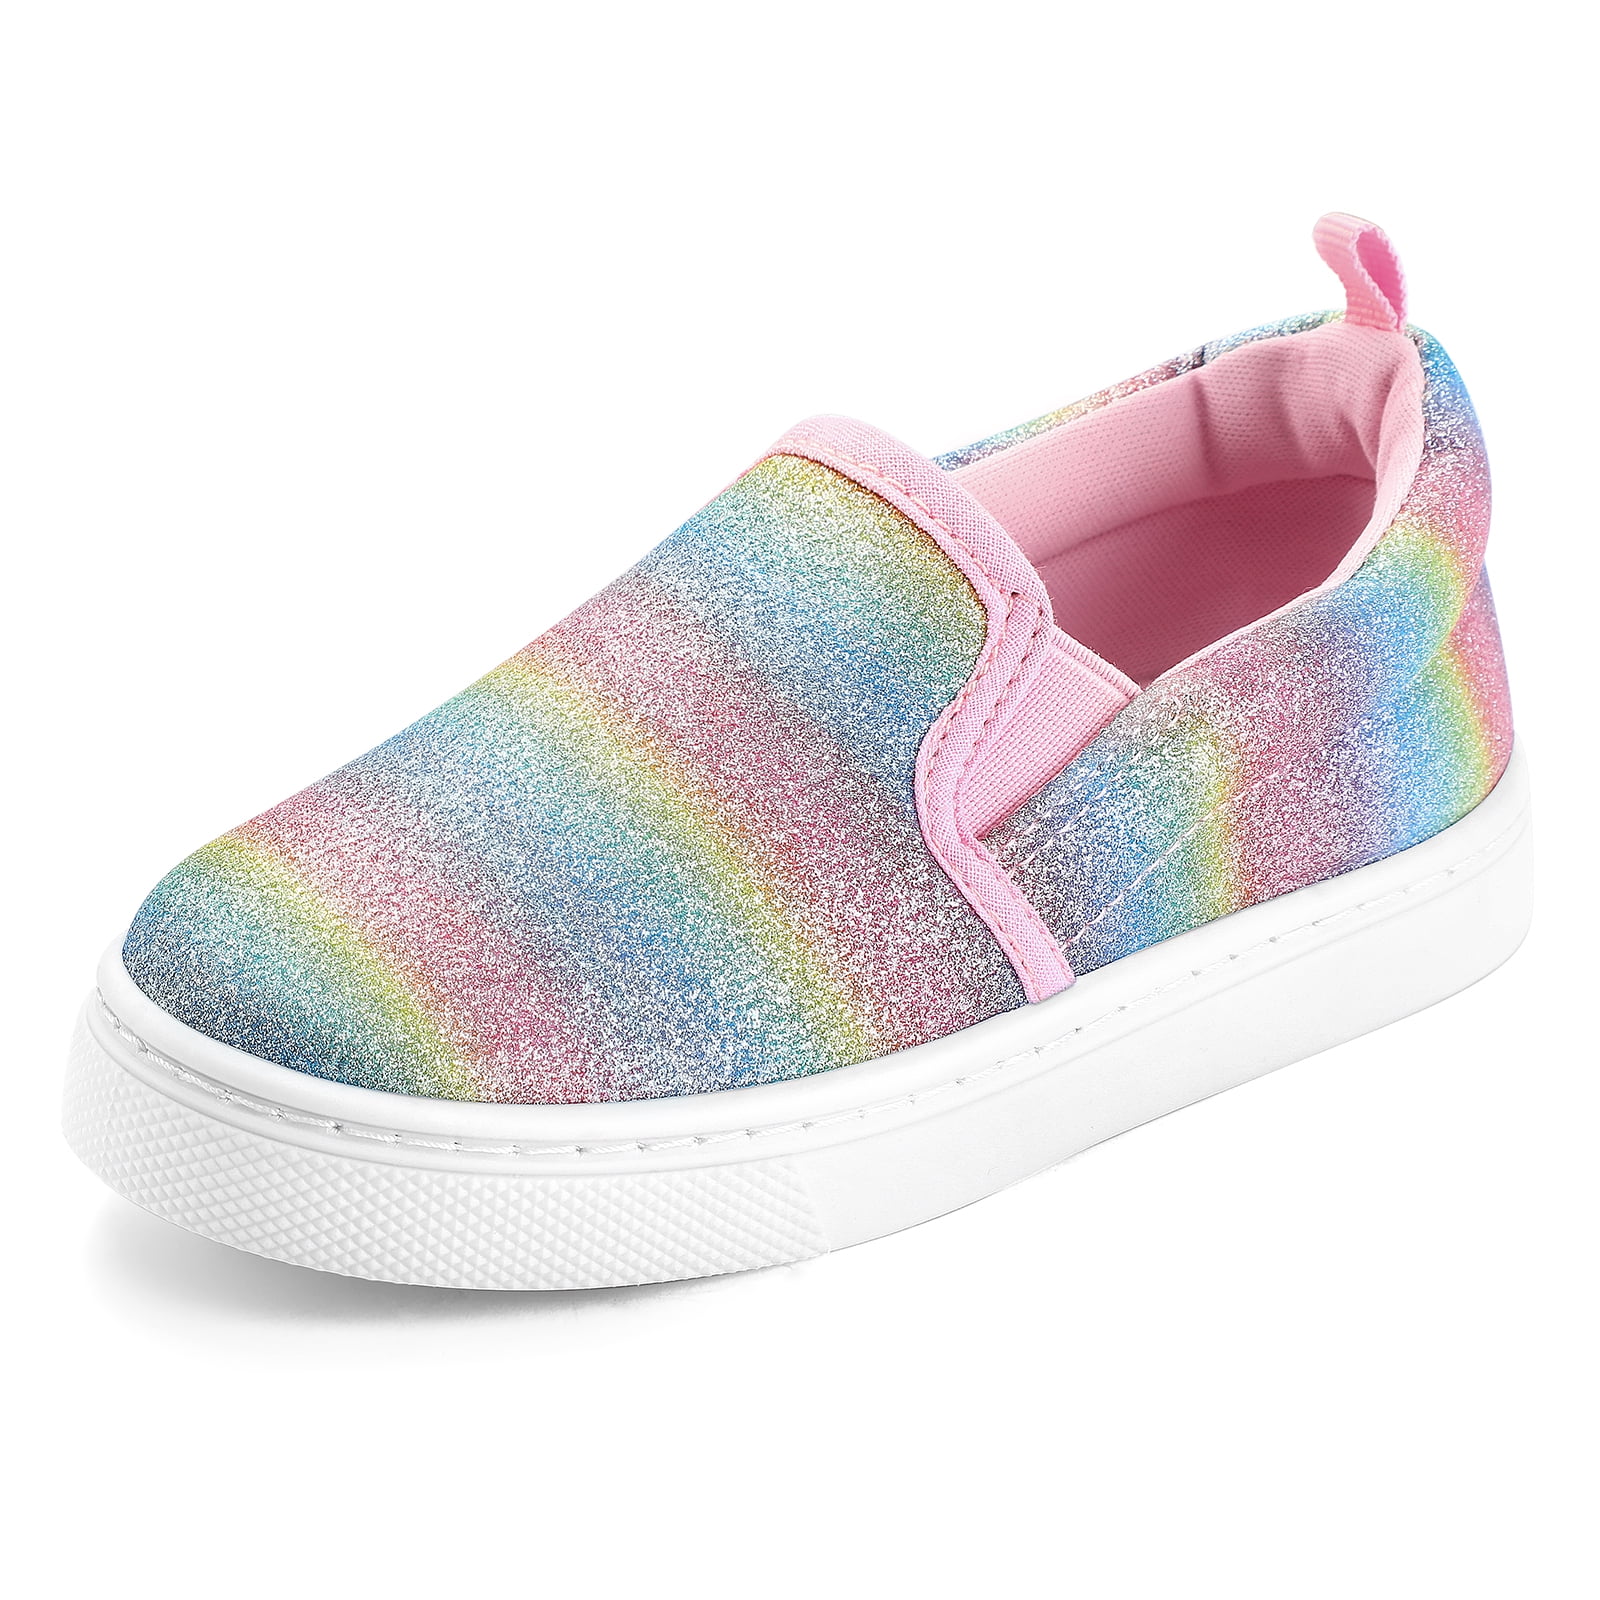 BOCCA Toddler Girls Colorful Slip on Kids Canvas Walking Shoes Size 12 ...